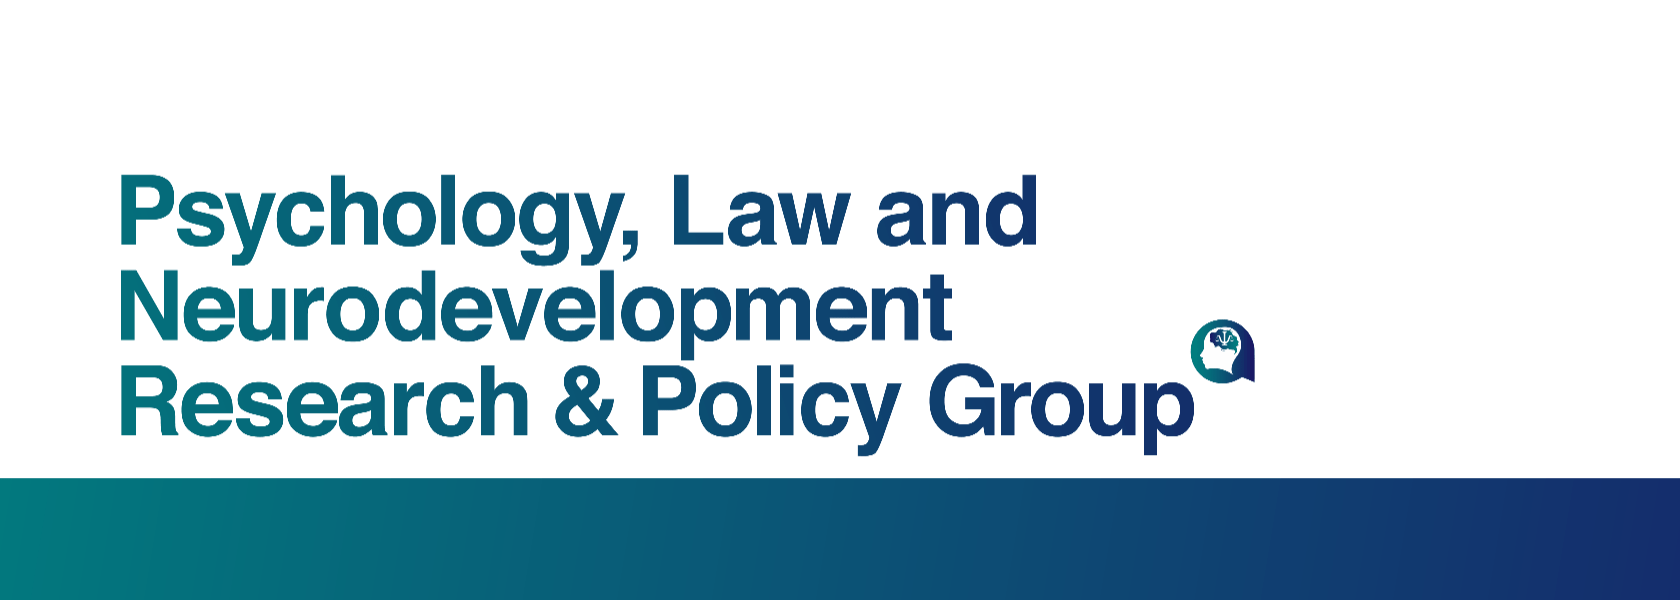 Psychology, Law, and Neurodevelopment Research & Policy Group